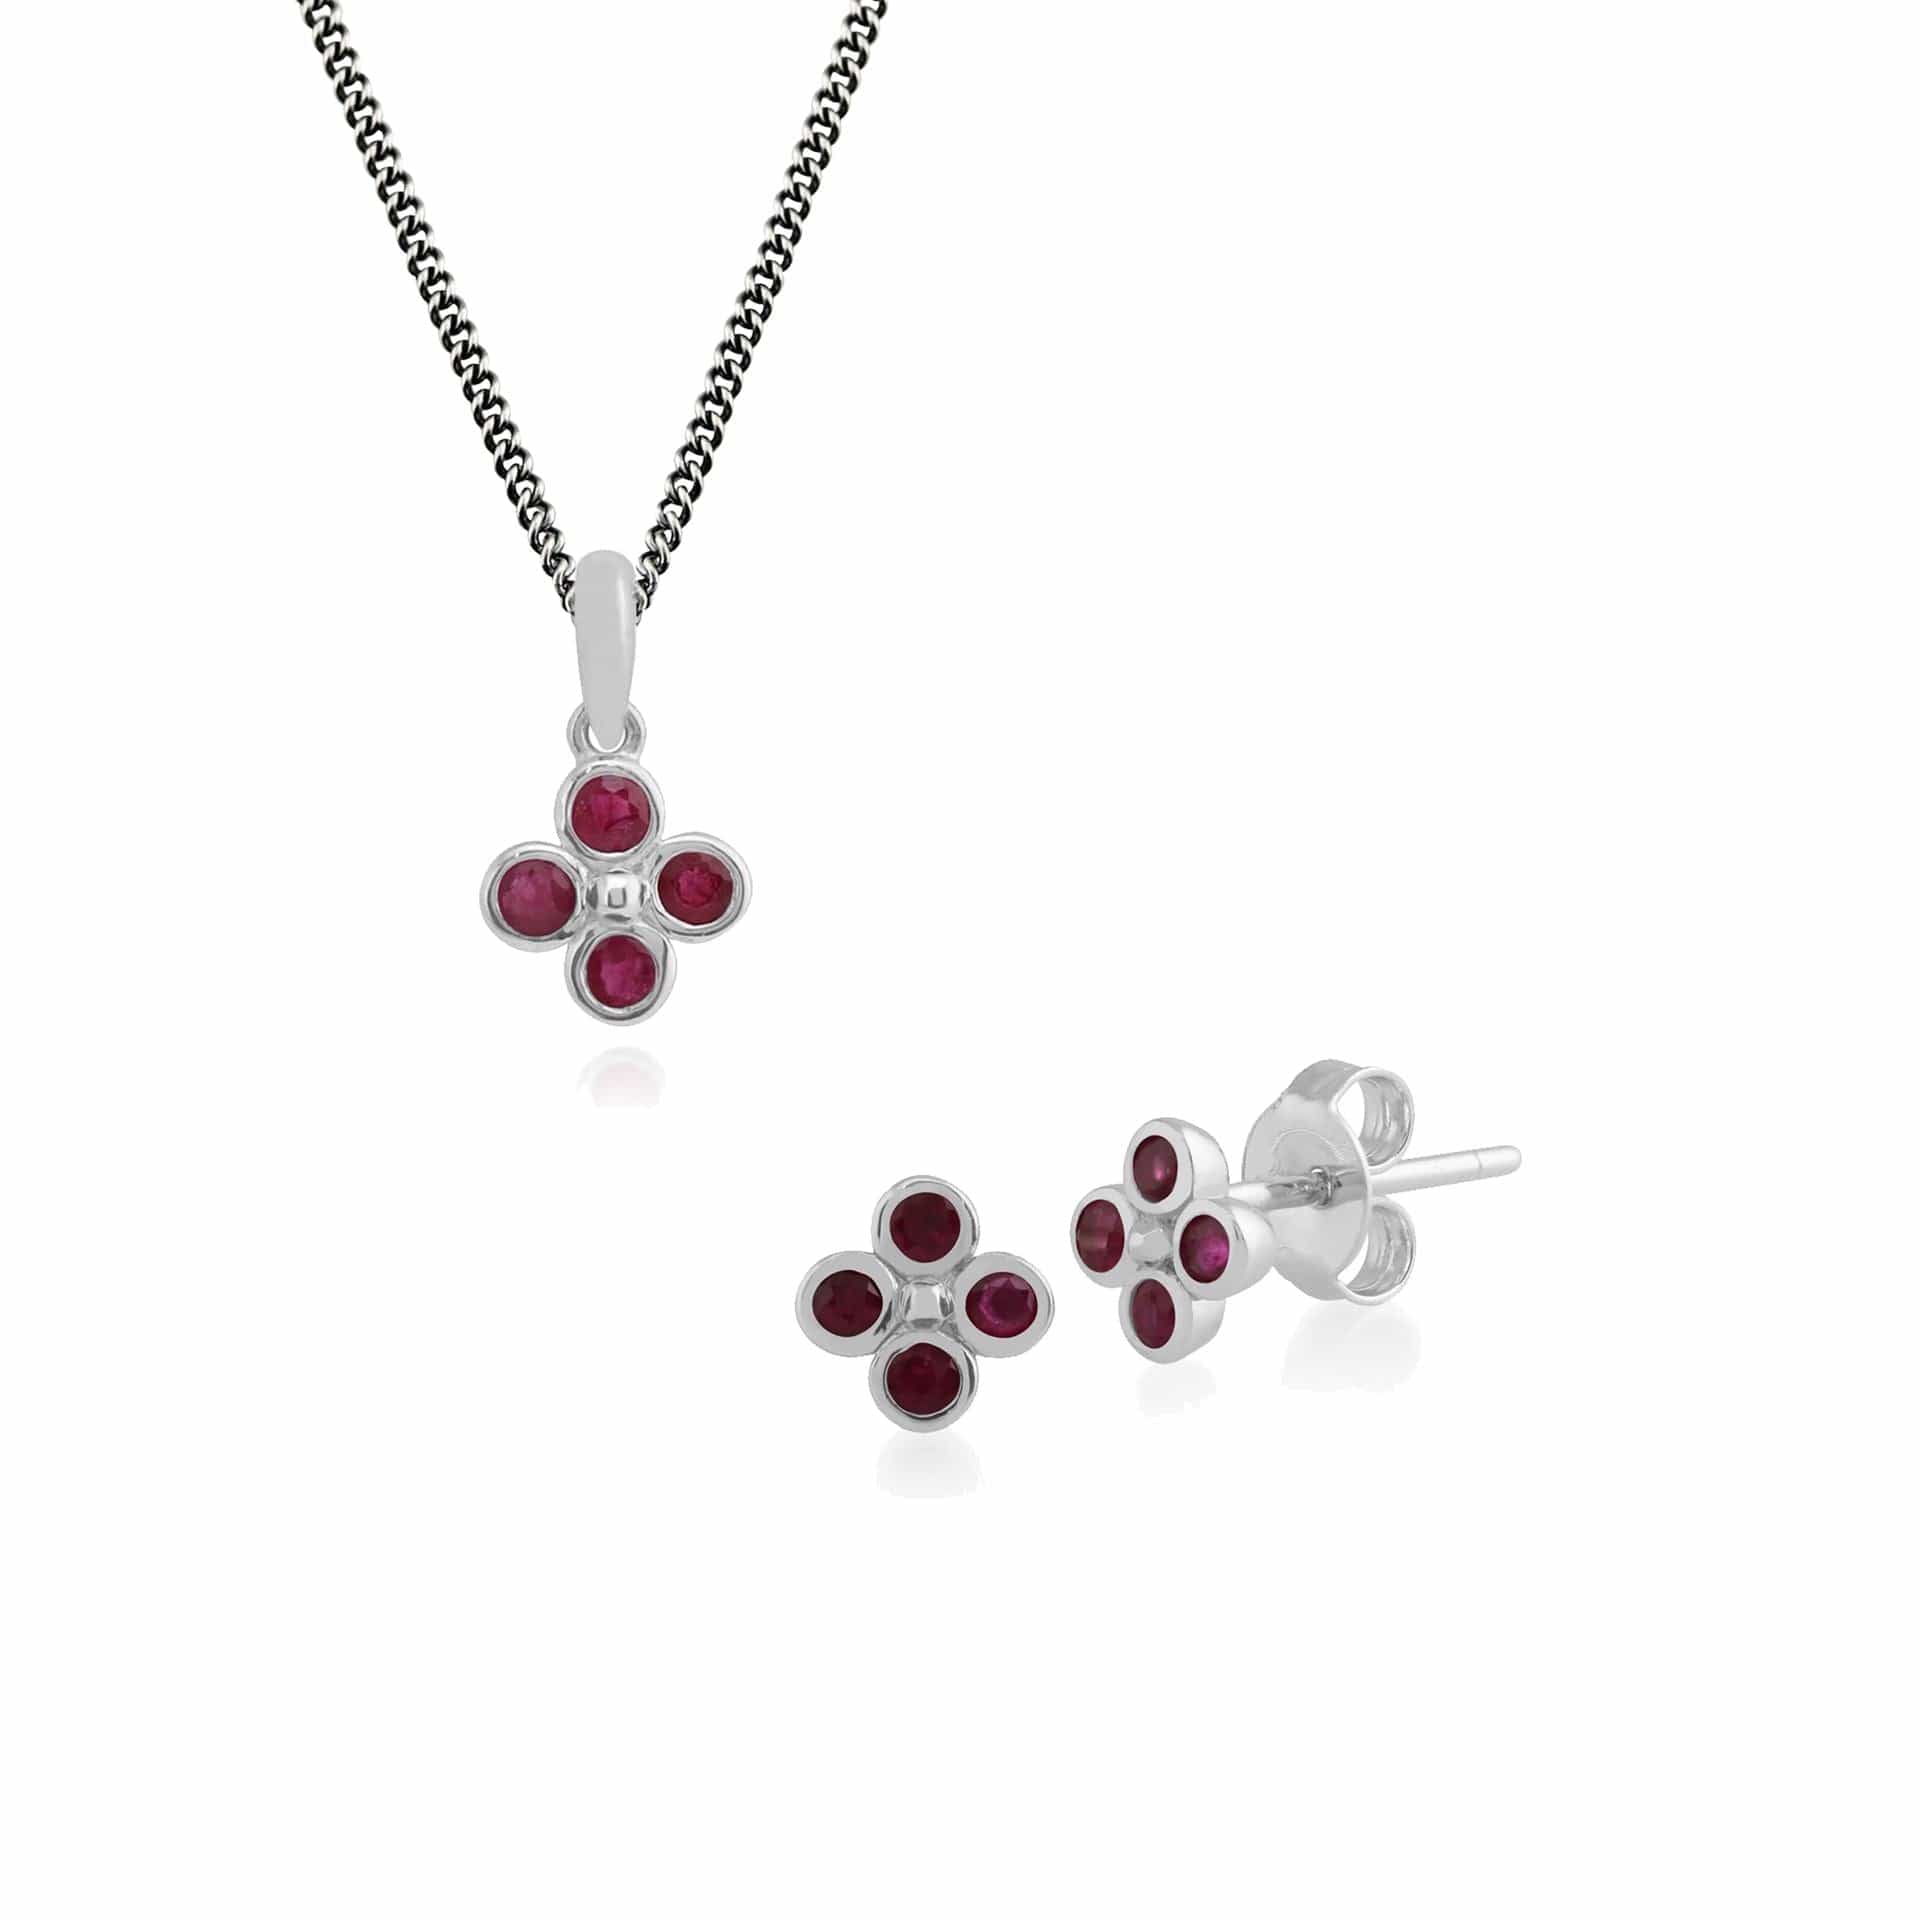 270E020402925-270P022002925 Floral Round Ruby Clover Stud Earrings & Pendant Set in 925 Sterling Silver 1